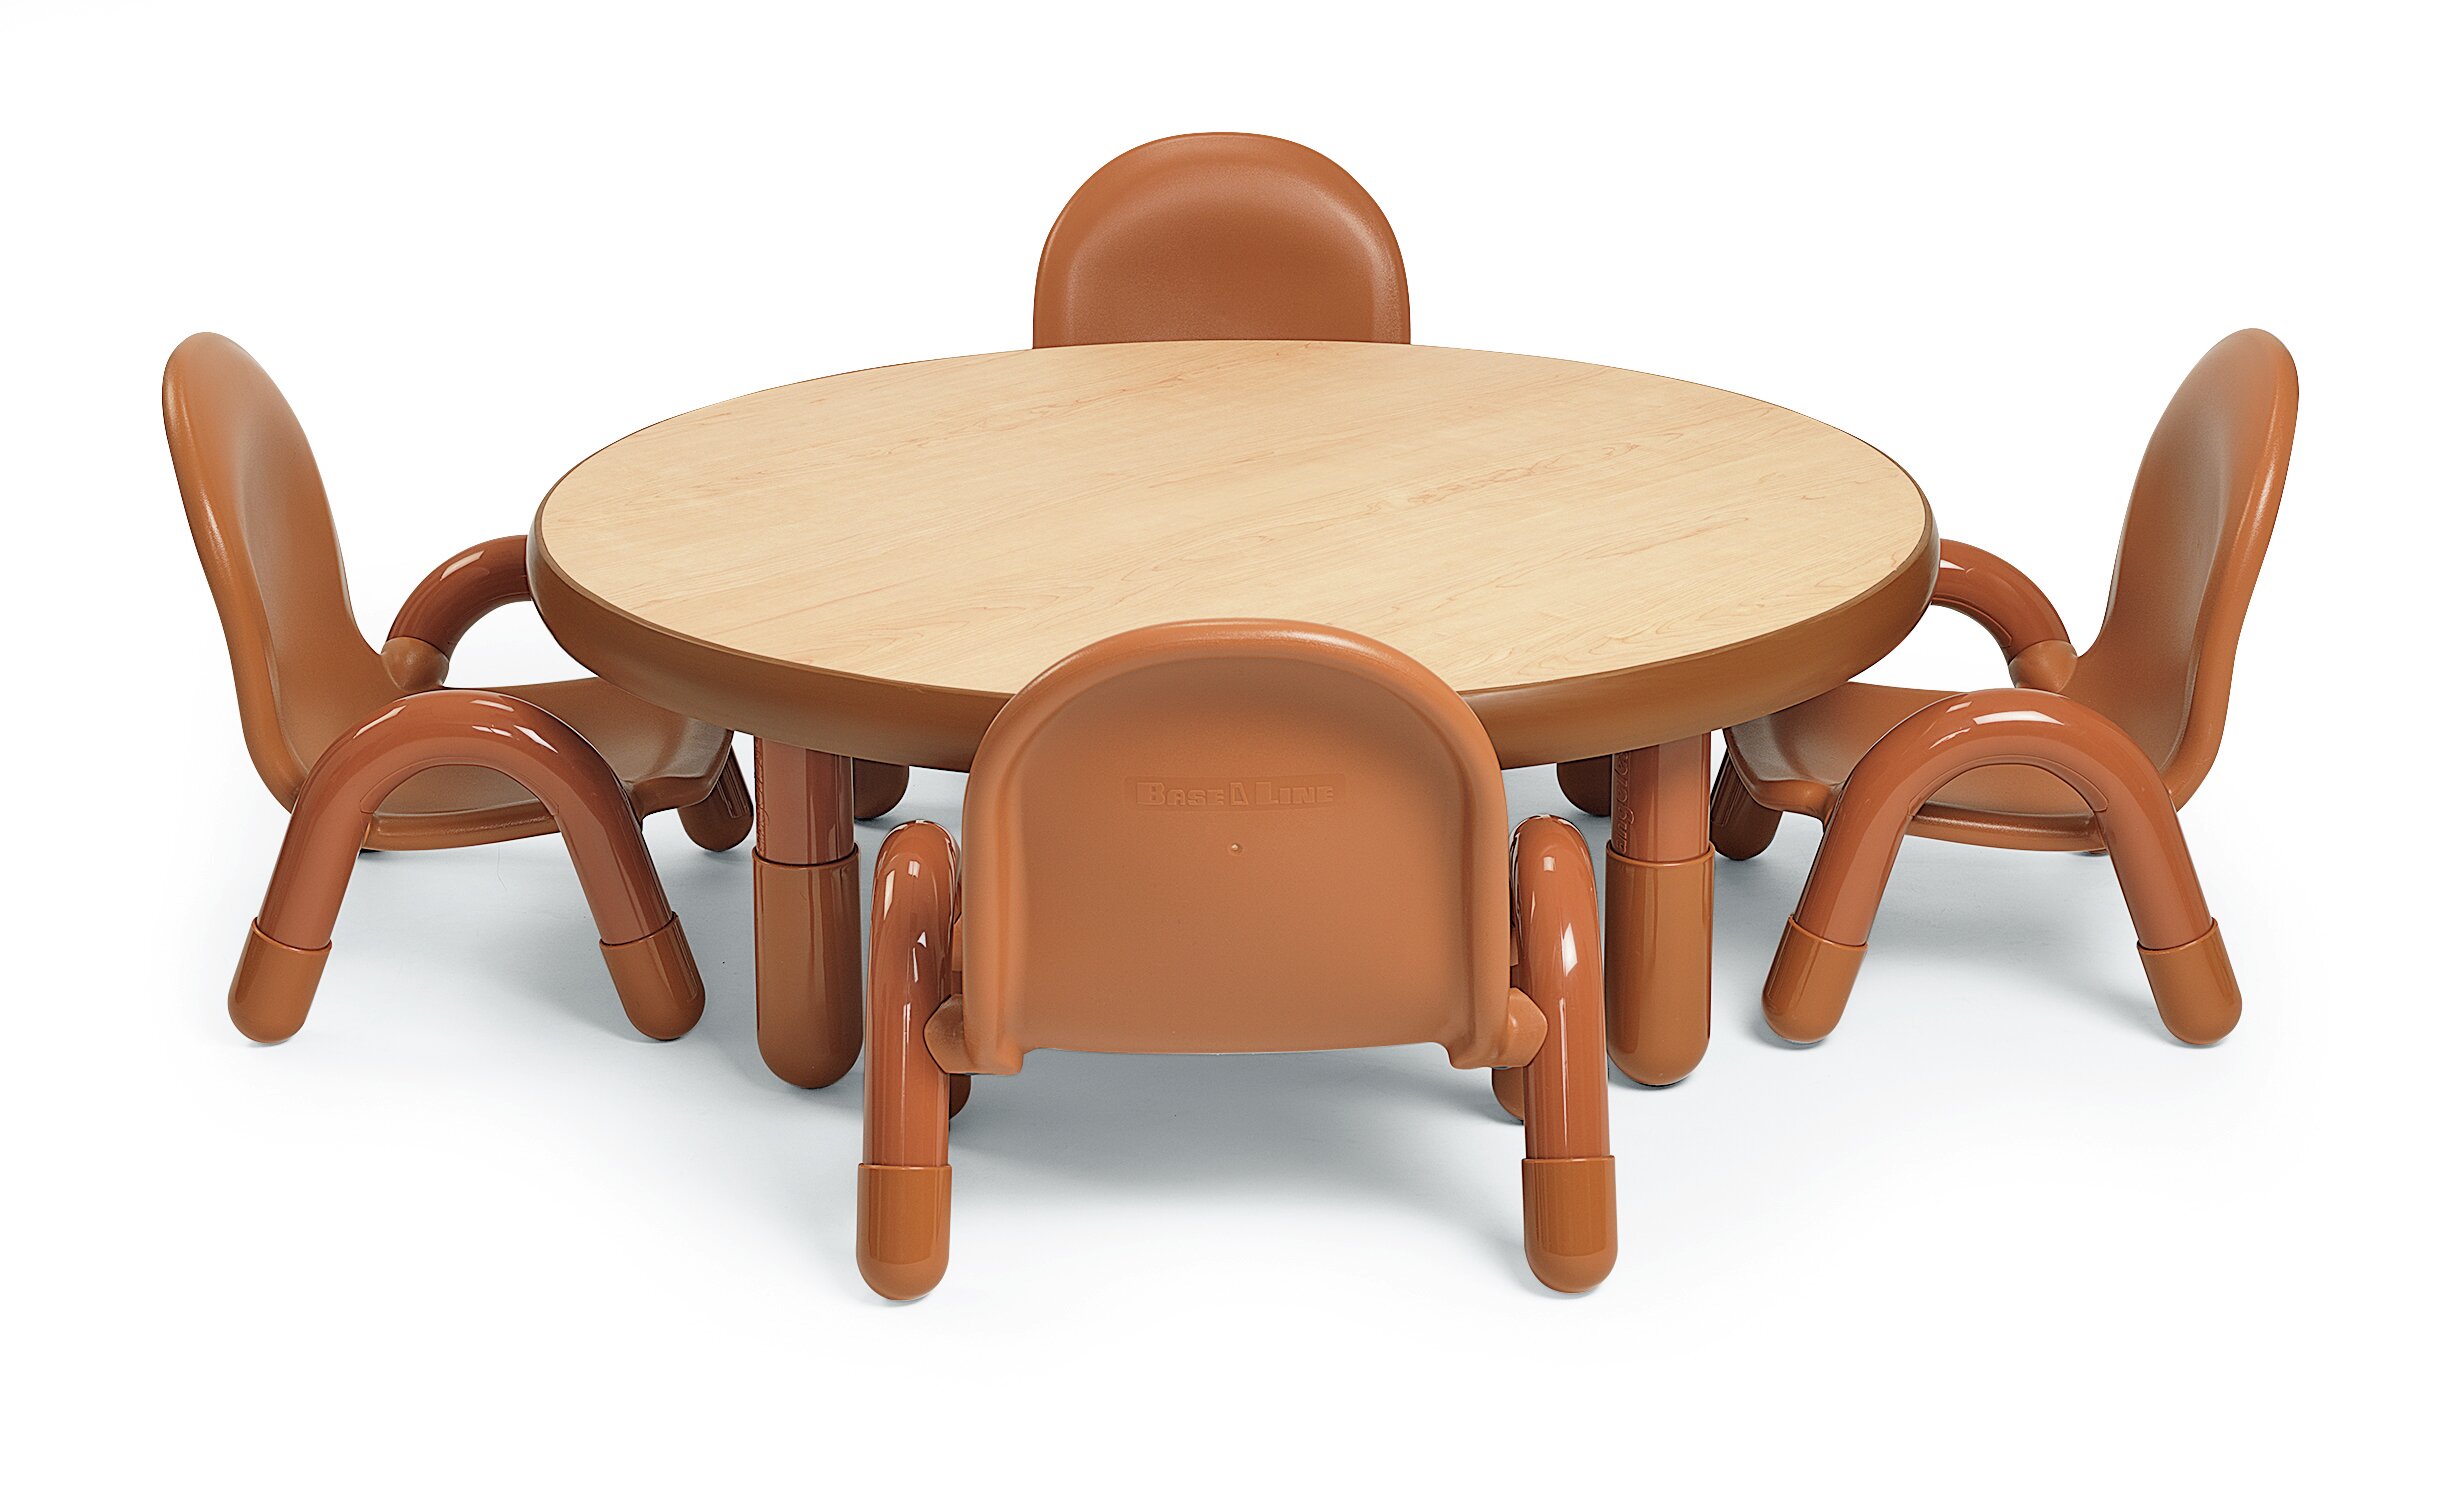 Childrens Factory Baseline Kids Round Play Activity Table And